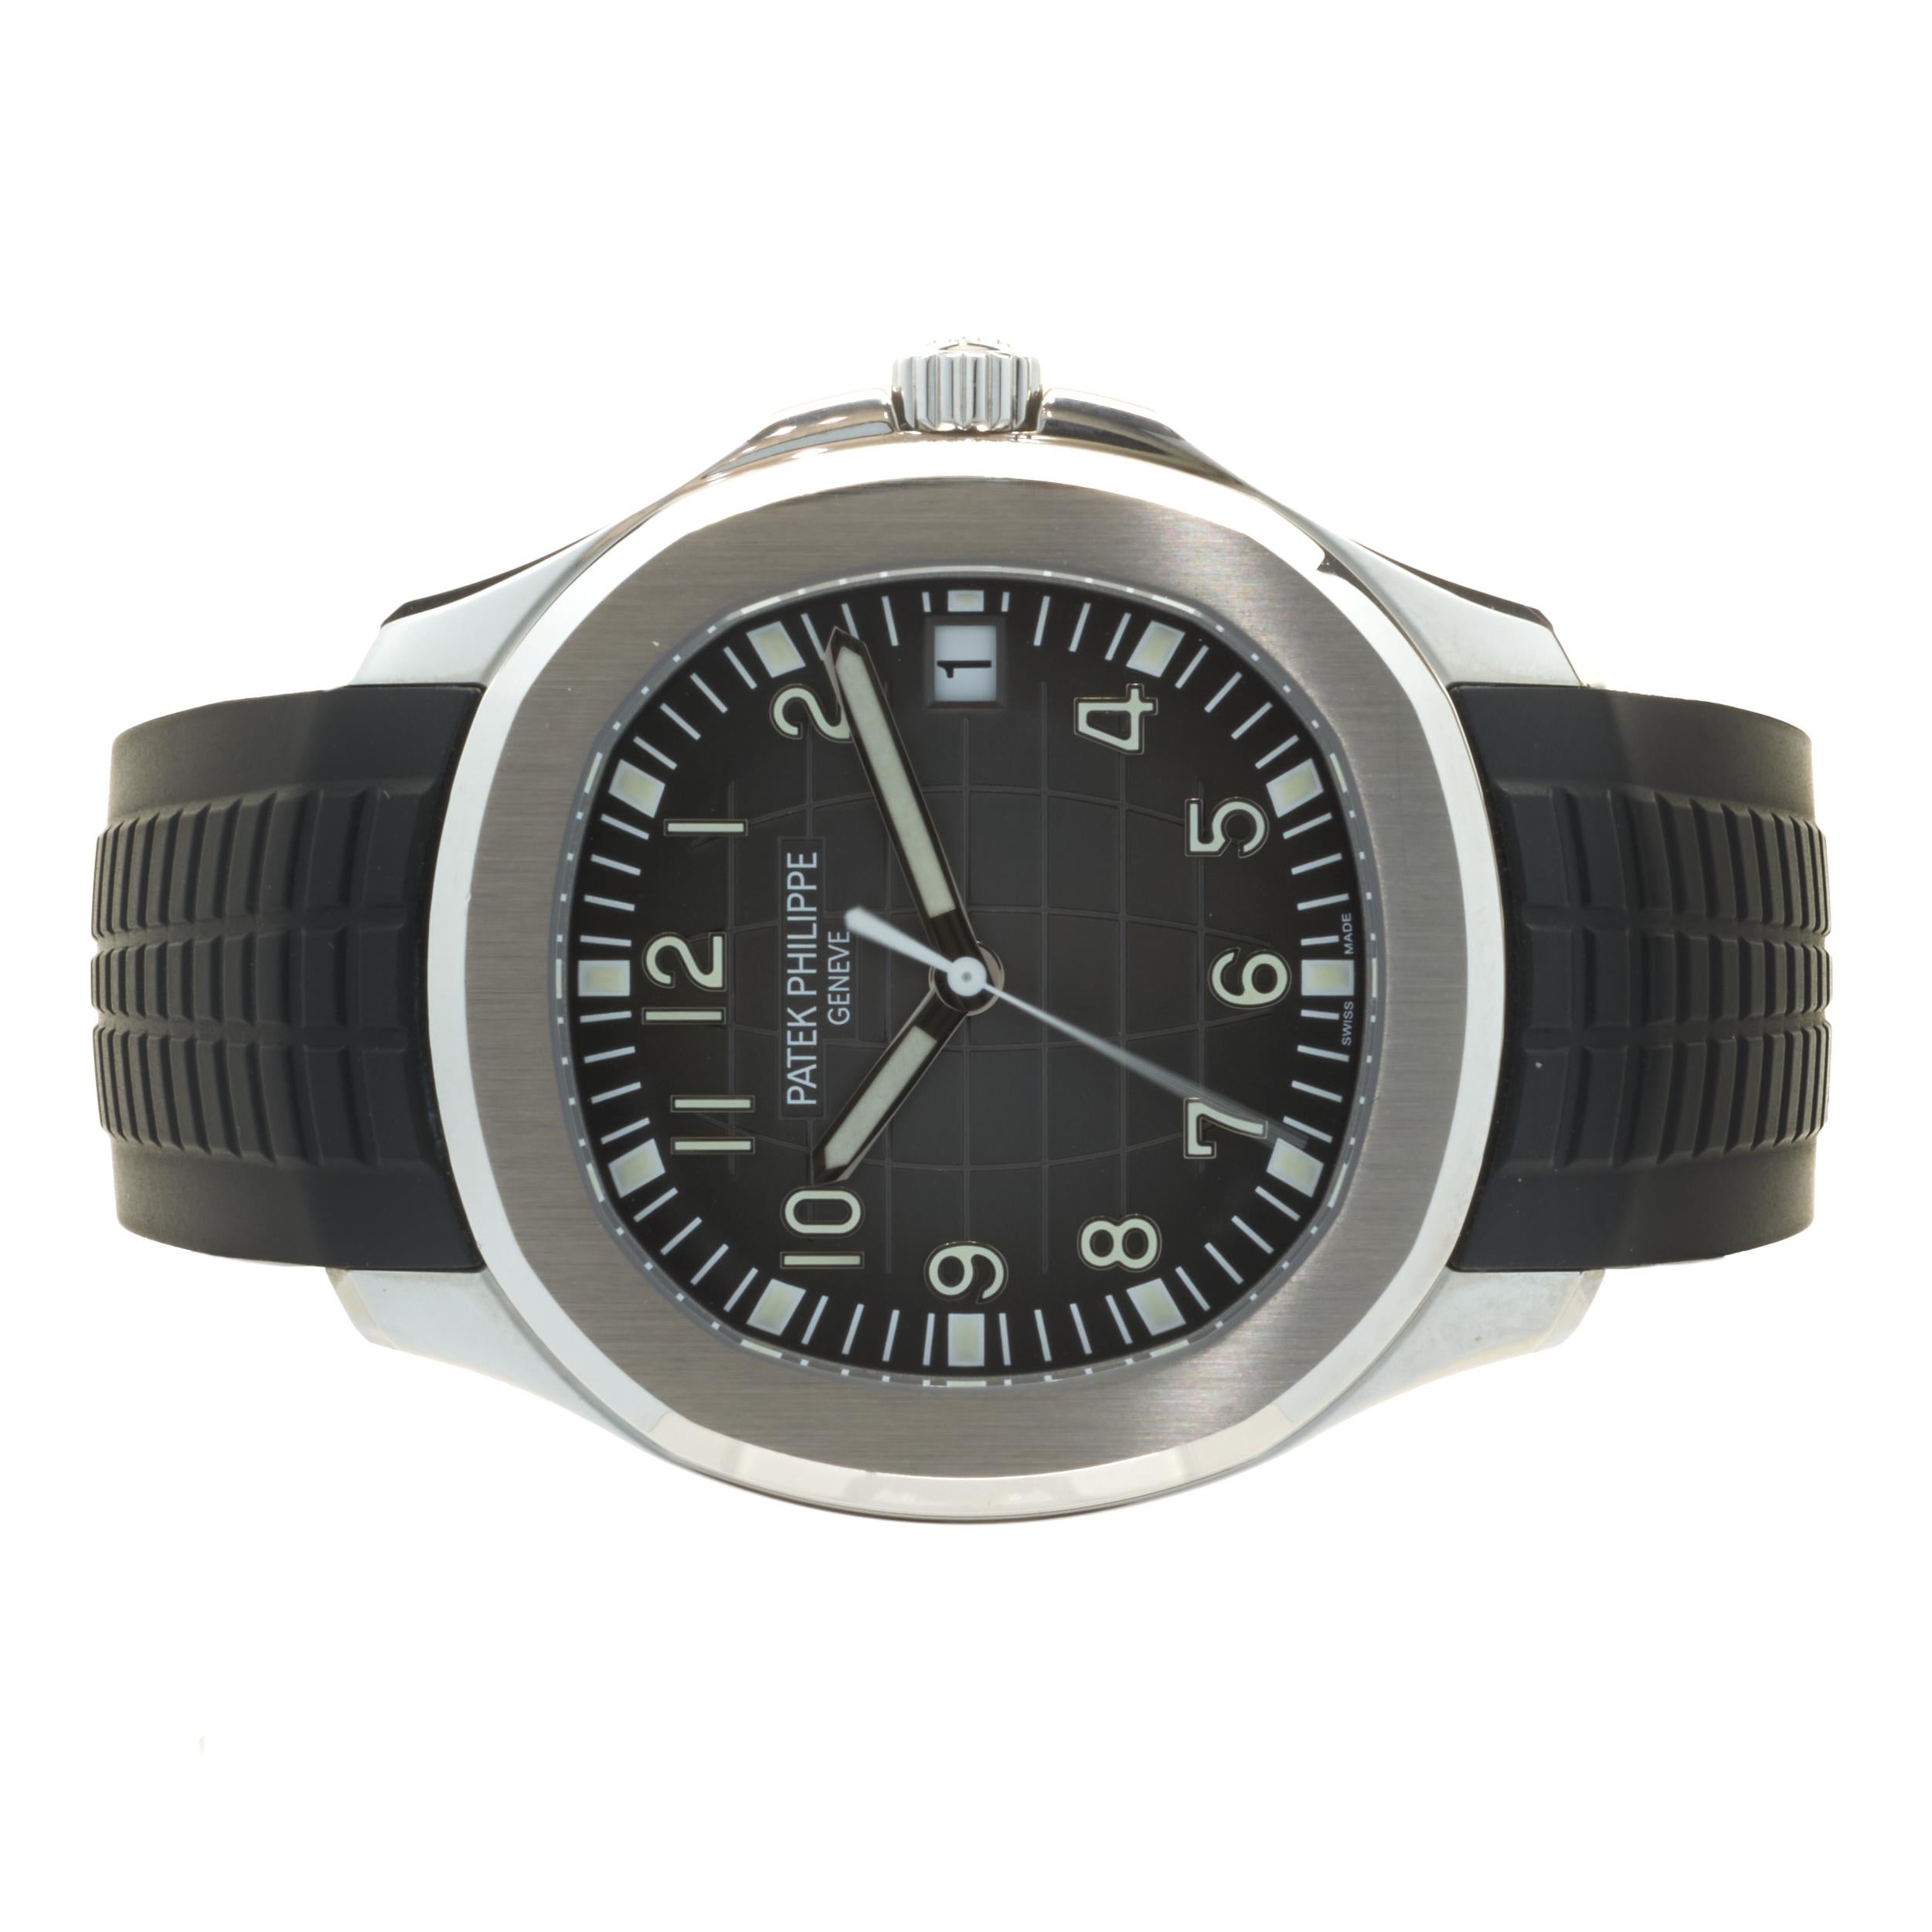 Movement: automatic, Caliber 324
Function: hours, minuets, seconds, date
Case: 40.8mm stainless steel round case, sapphire crystal
Dial: black embossed dial
Band: Patek Philippe “Tropical” composite black strap, fold-over clasp
Reference #: